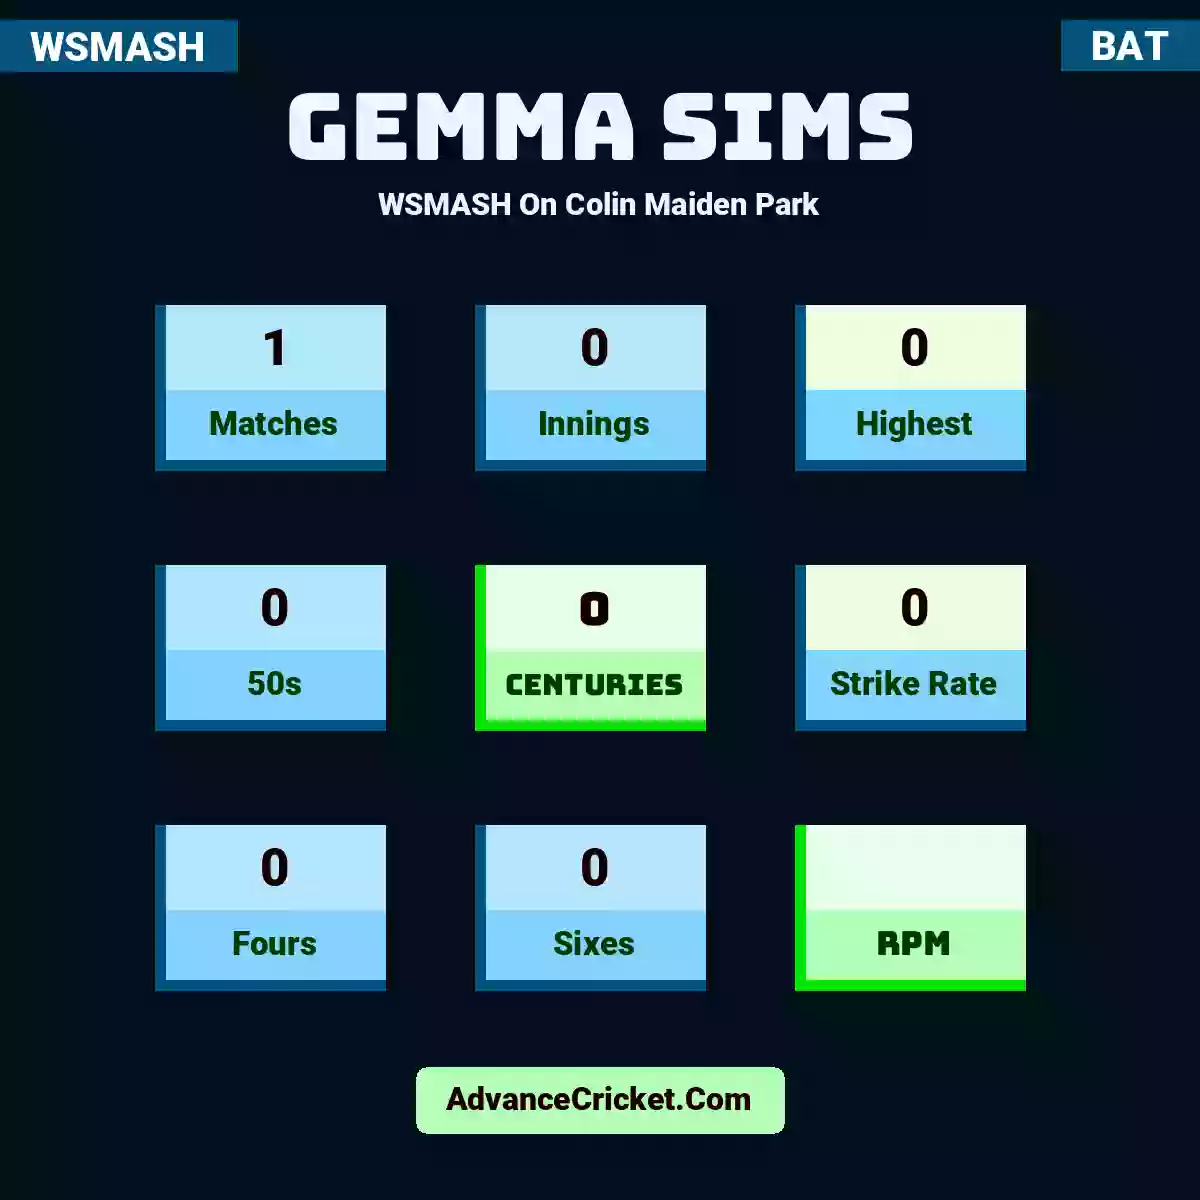 Gemma Sims WSMASH  On Colin Maiden Park, Gemma Sims played 1 matches, scored 0 runs as highest, 0 half-centuries, and 0 centuries, with a strike rate of 0. G.Sims hit 0 fours and 0 sixes.